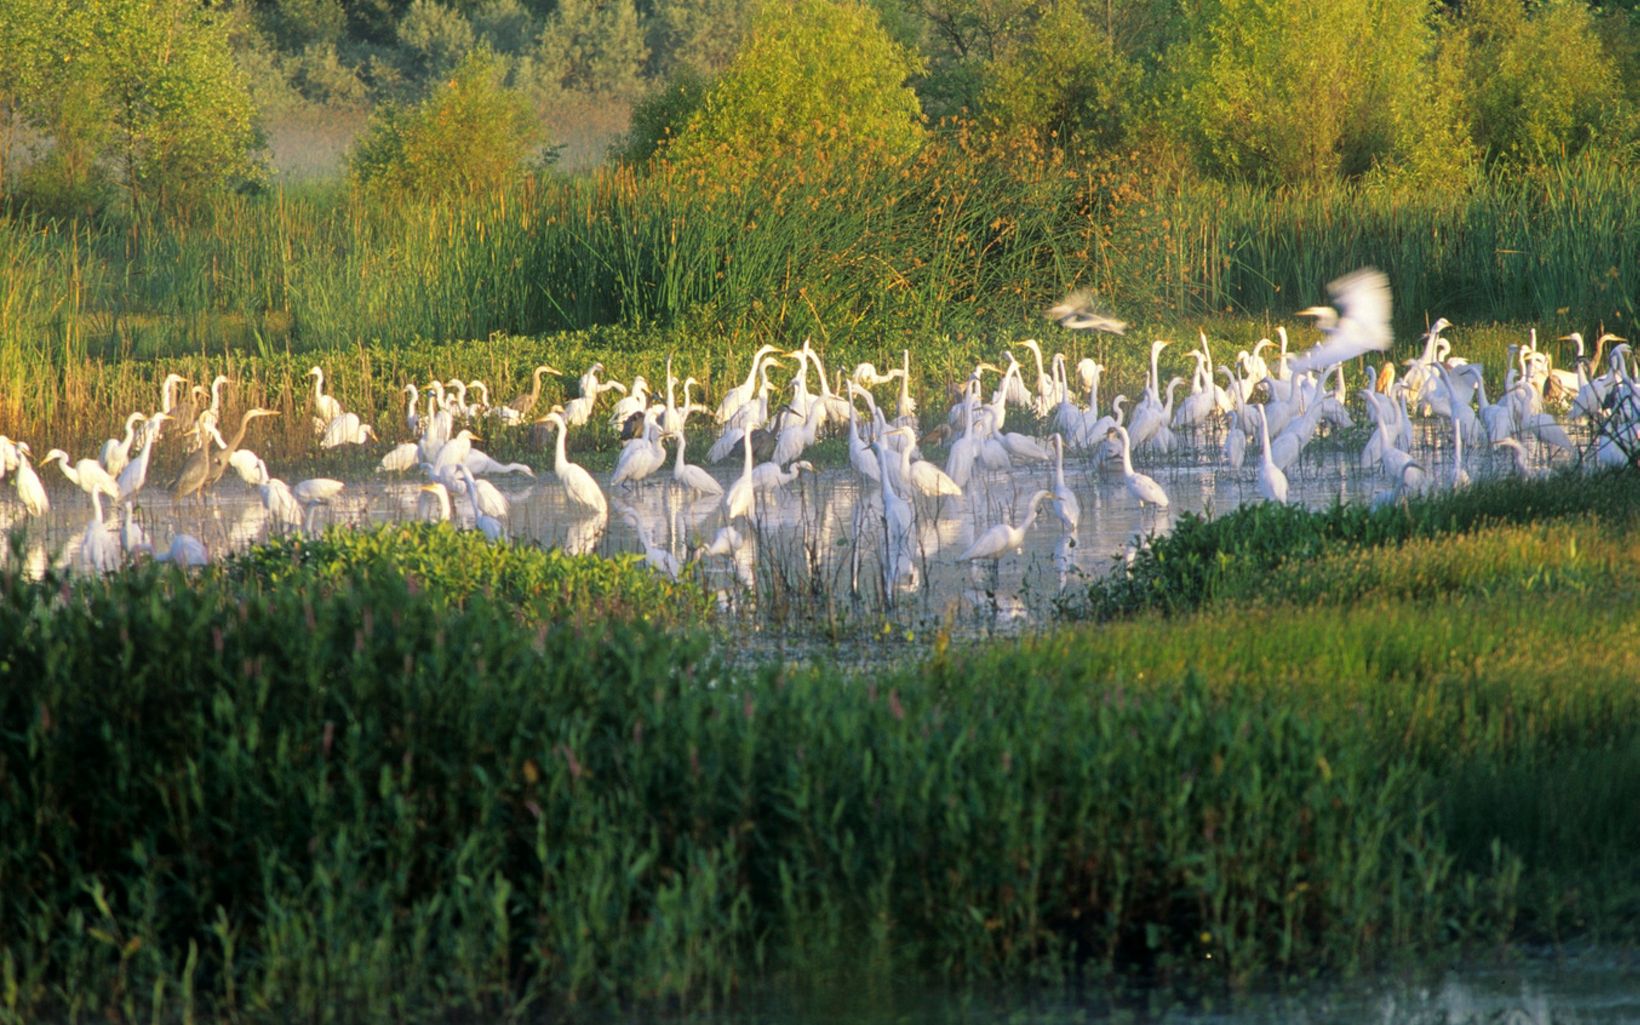 Egrets and pelicans forage in shallow waters of wetlands with tall grasses in the foreground.